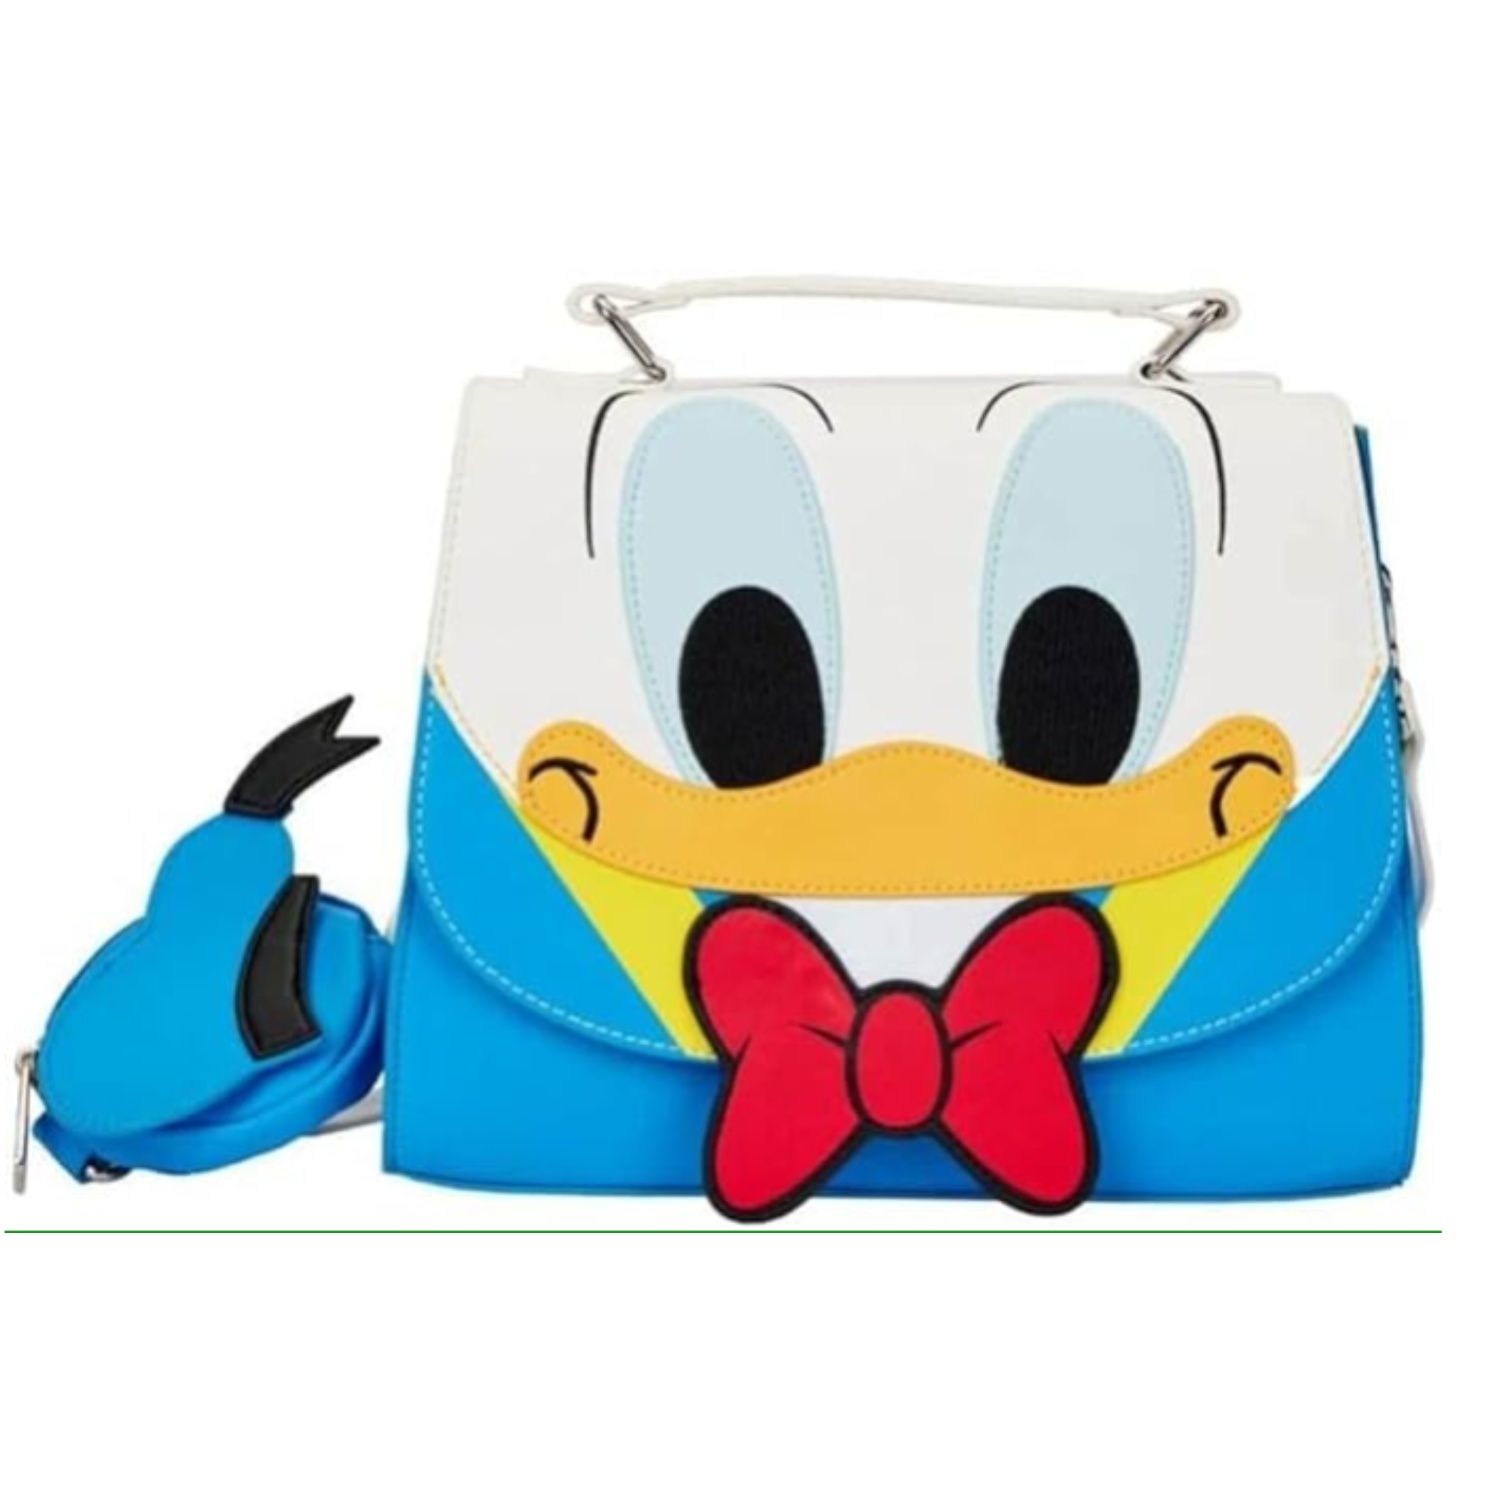 This purse is shaped like Donald Duck and includes his hat as a coin purse.23-12-50-PM-3862-1